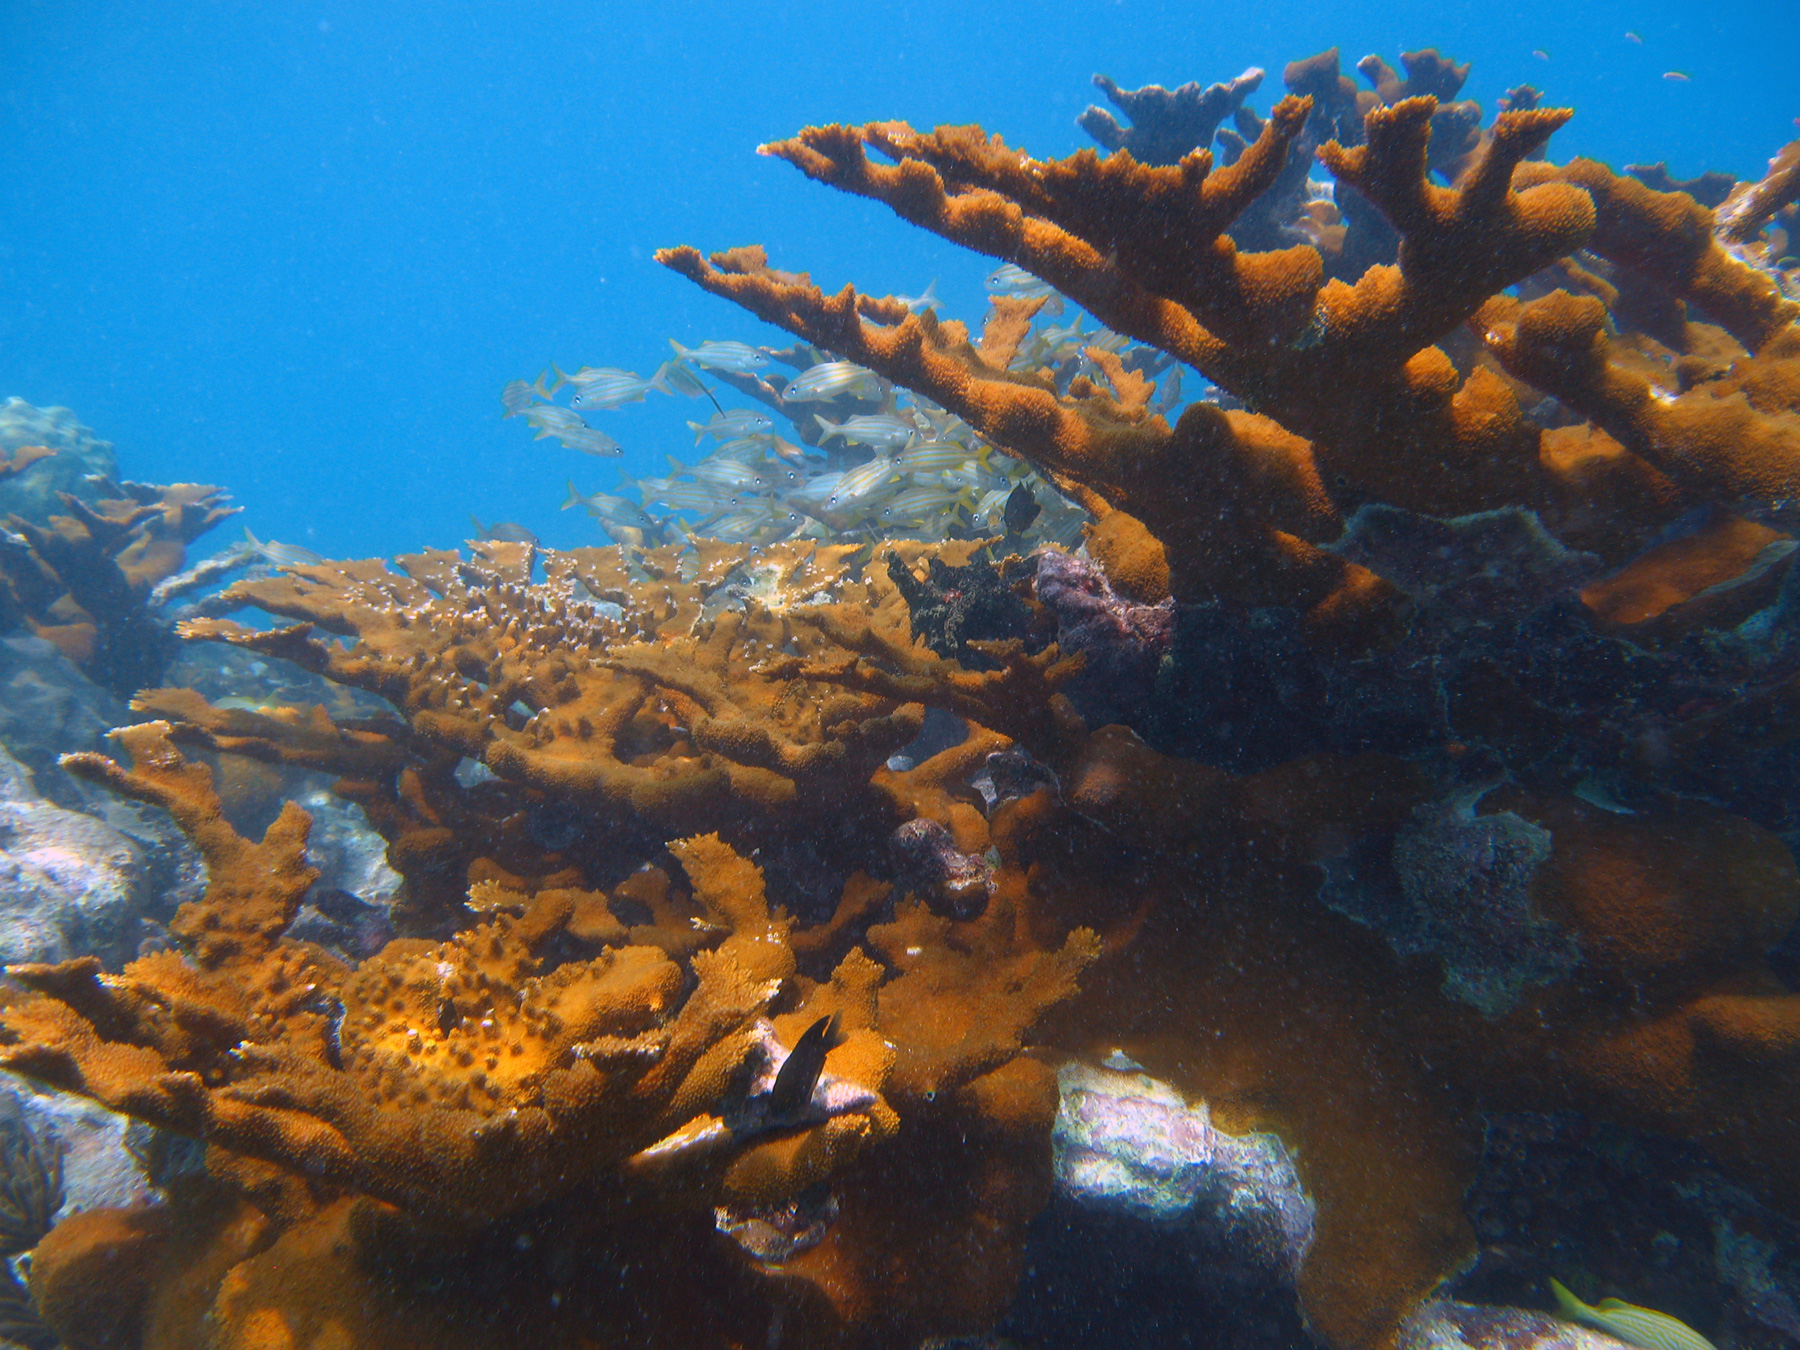 Image: Restoring Florida's Iconic Coral Reefs